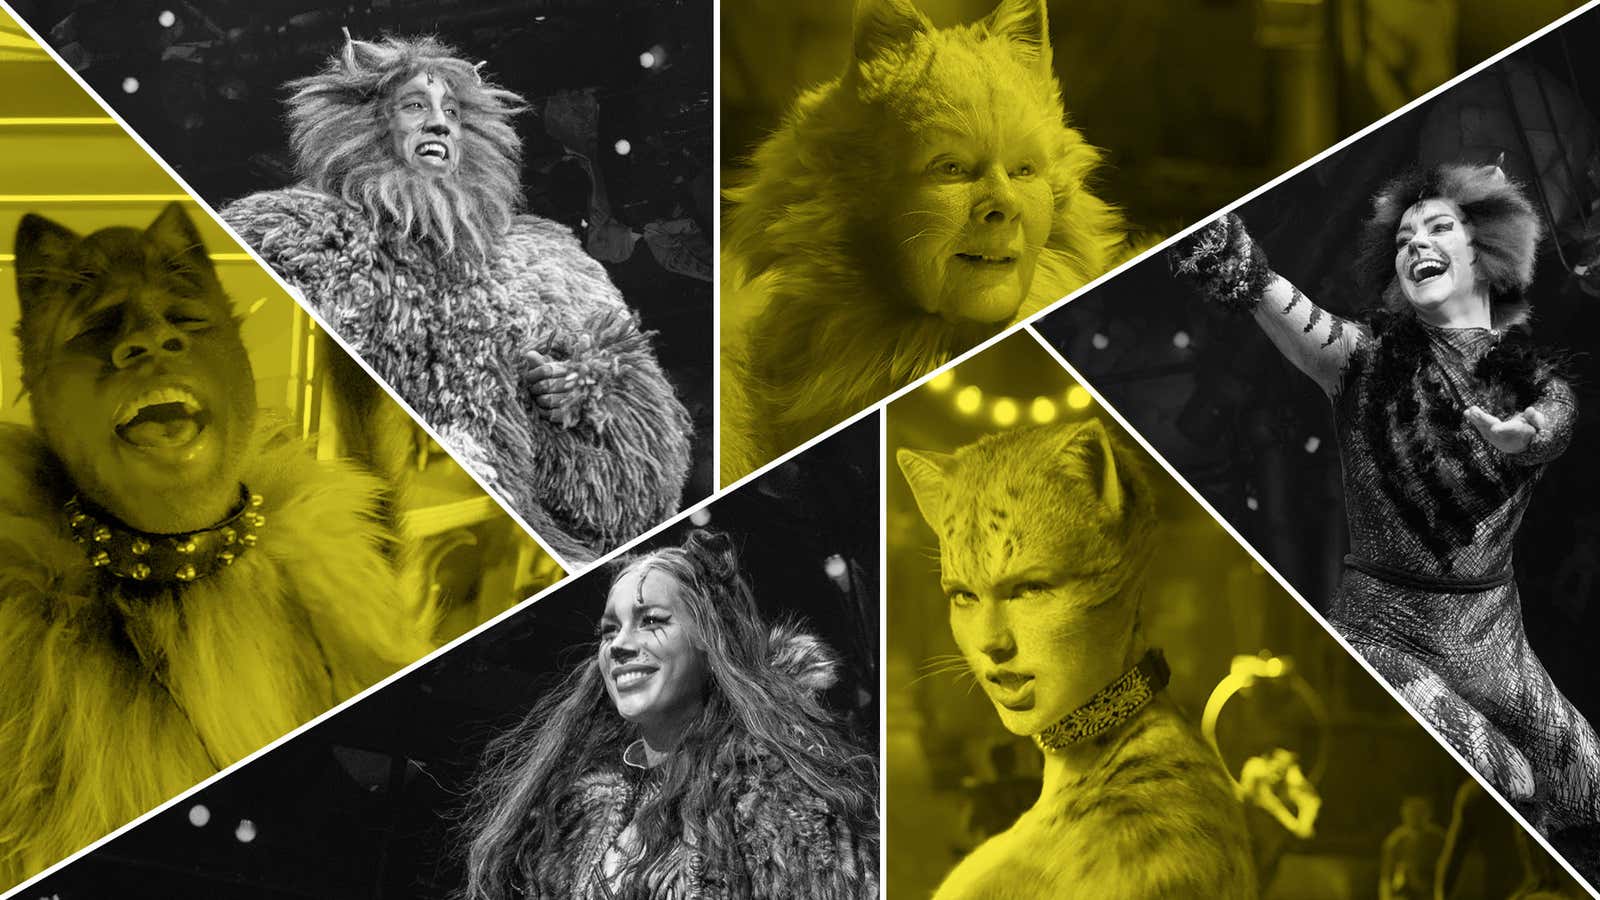 Jellicle cats, onstage and onscreen